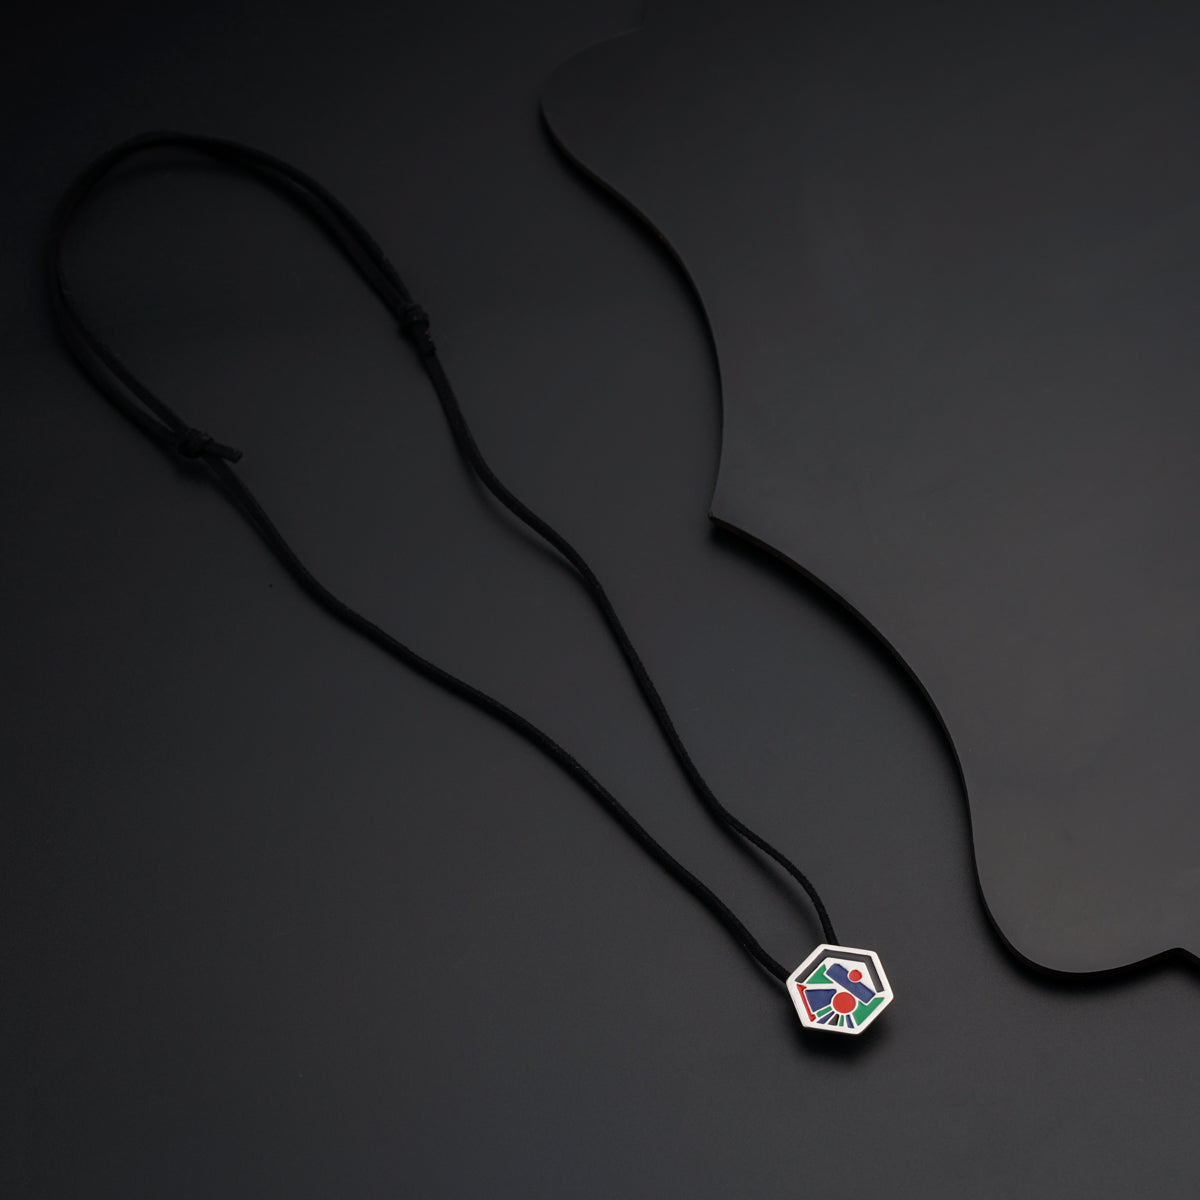 a black cord with a colorful pendant on it